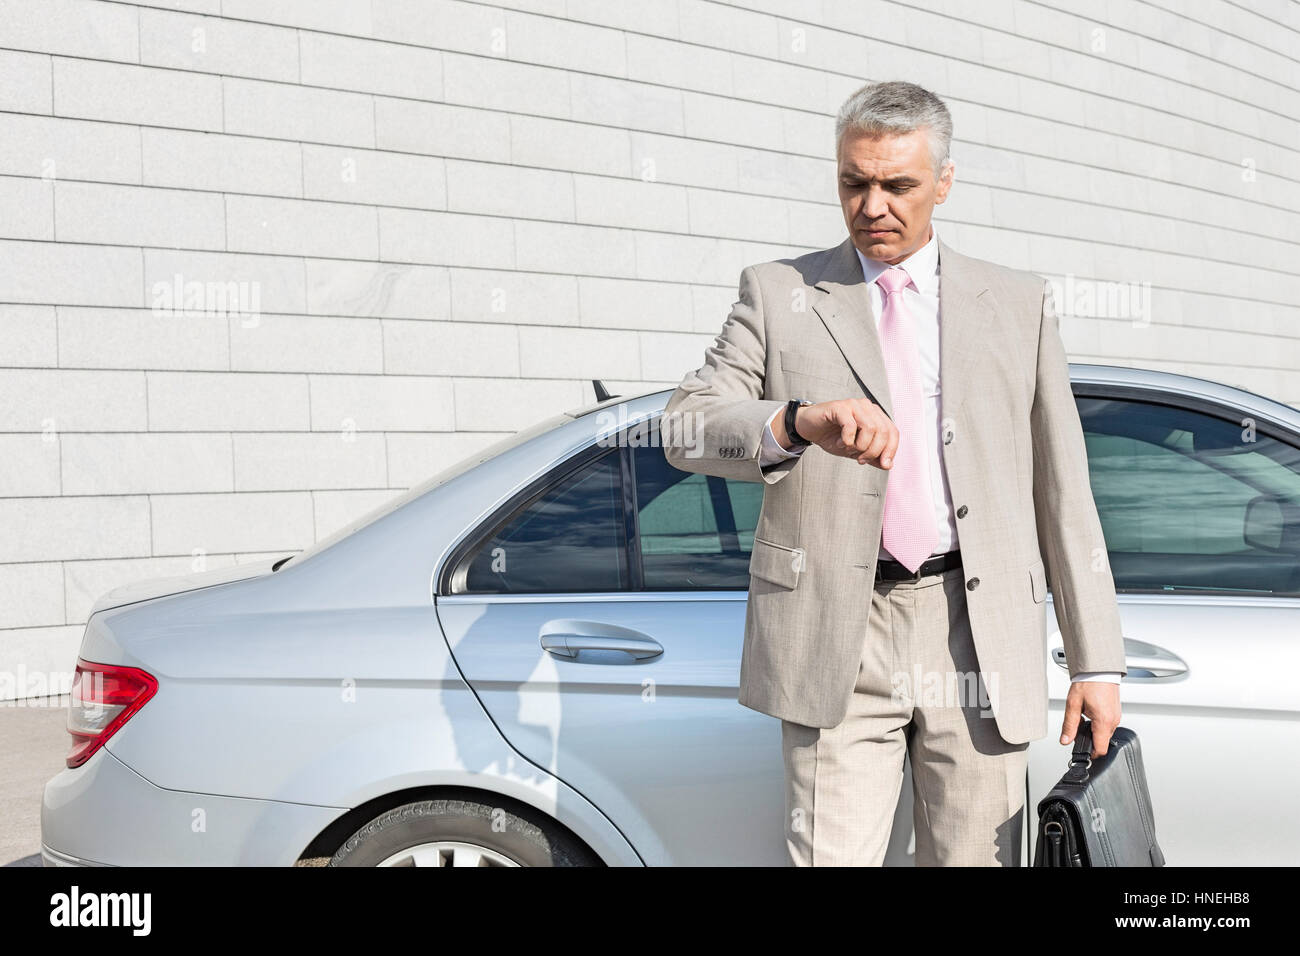 Businessman checking the time in front of car outdoors Stock Photo